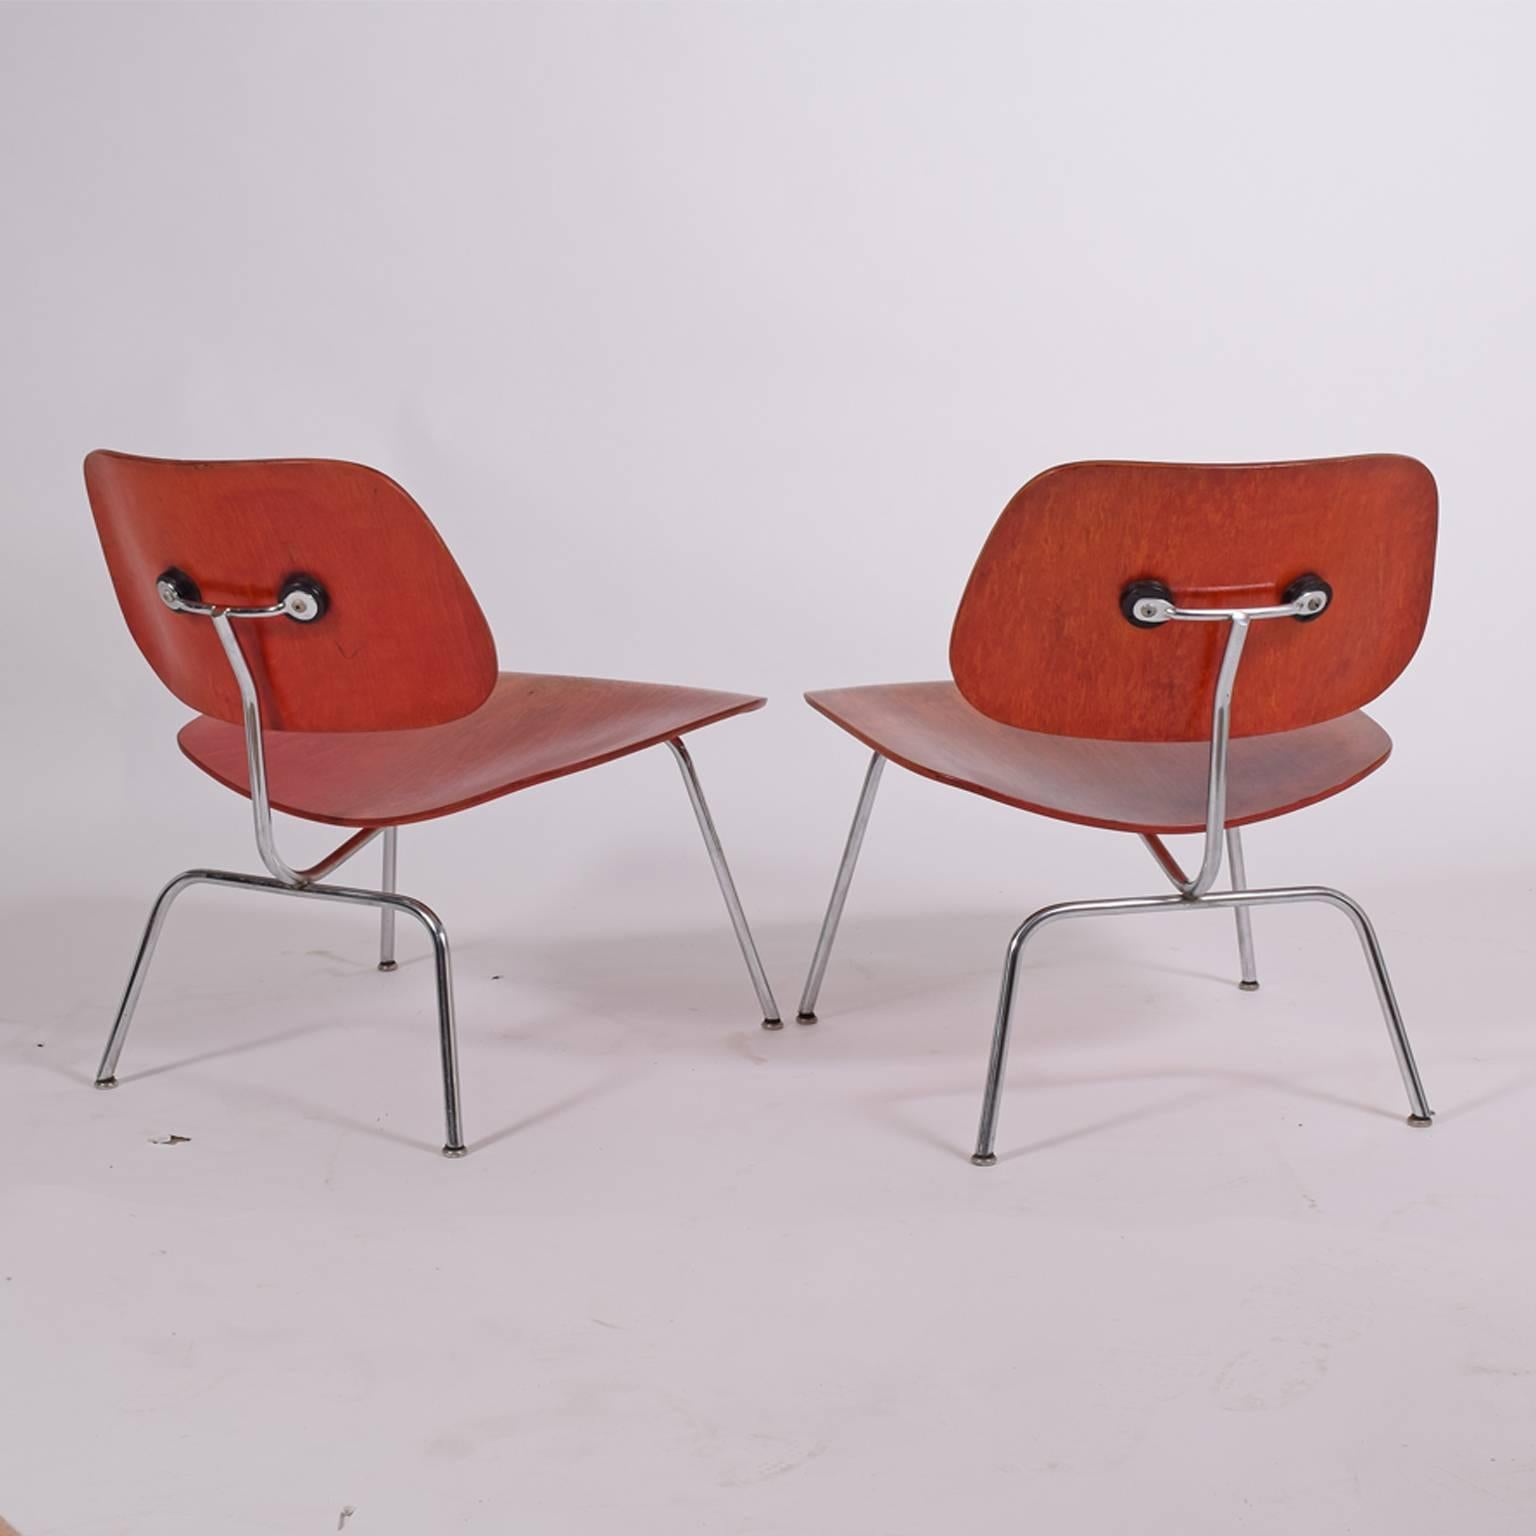 American Early LCM Red Aniline Dyed by Charles Eames for Herman Miller Right One SOLD